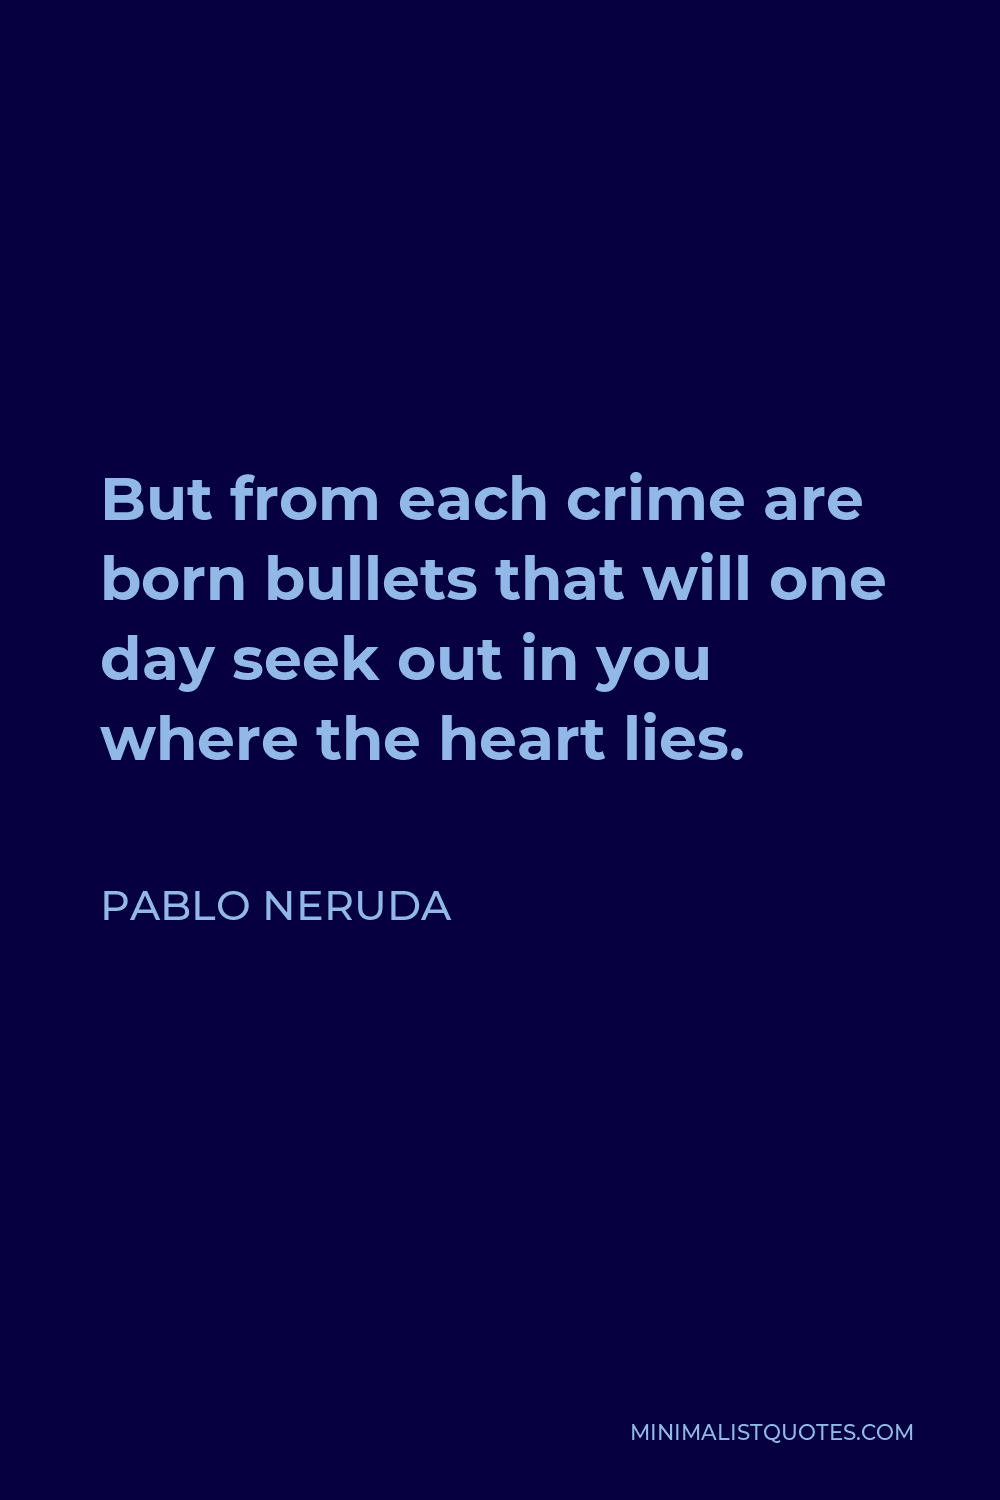 Pablo Neruda Quote - But from each crime are born bullets that will one day seek out in you where the heart lies.